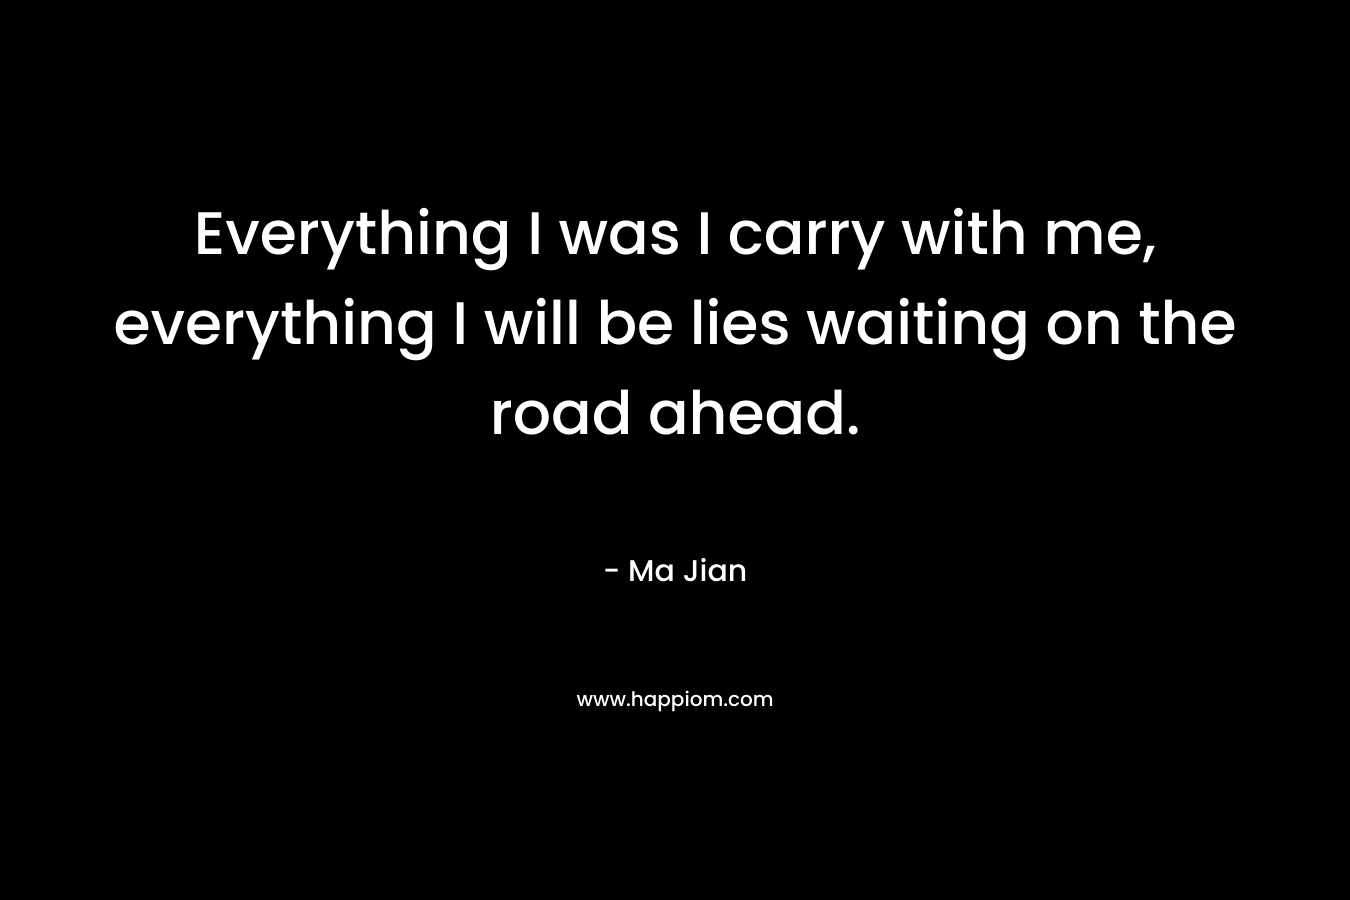 Everything I was I carry with me, everything I will be lies waiting on the road ahead.